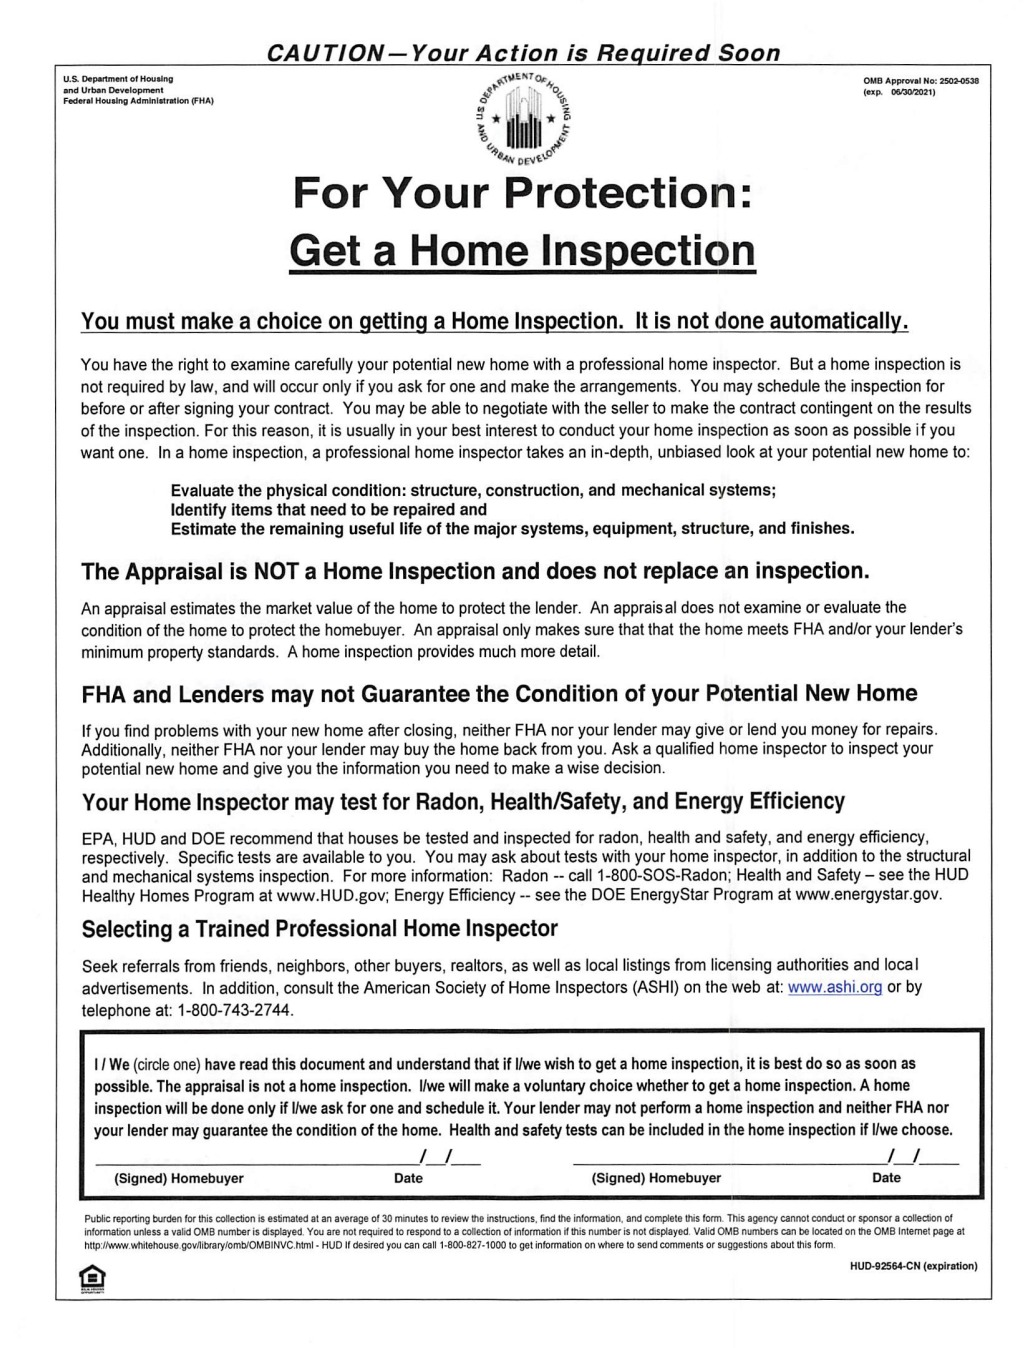 For your protection, get a home inspection form